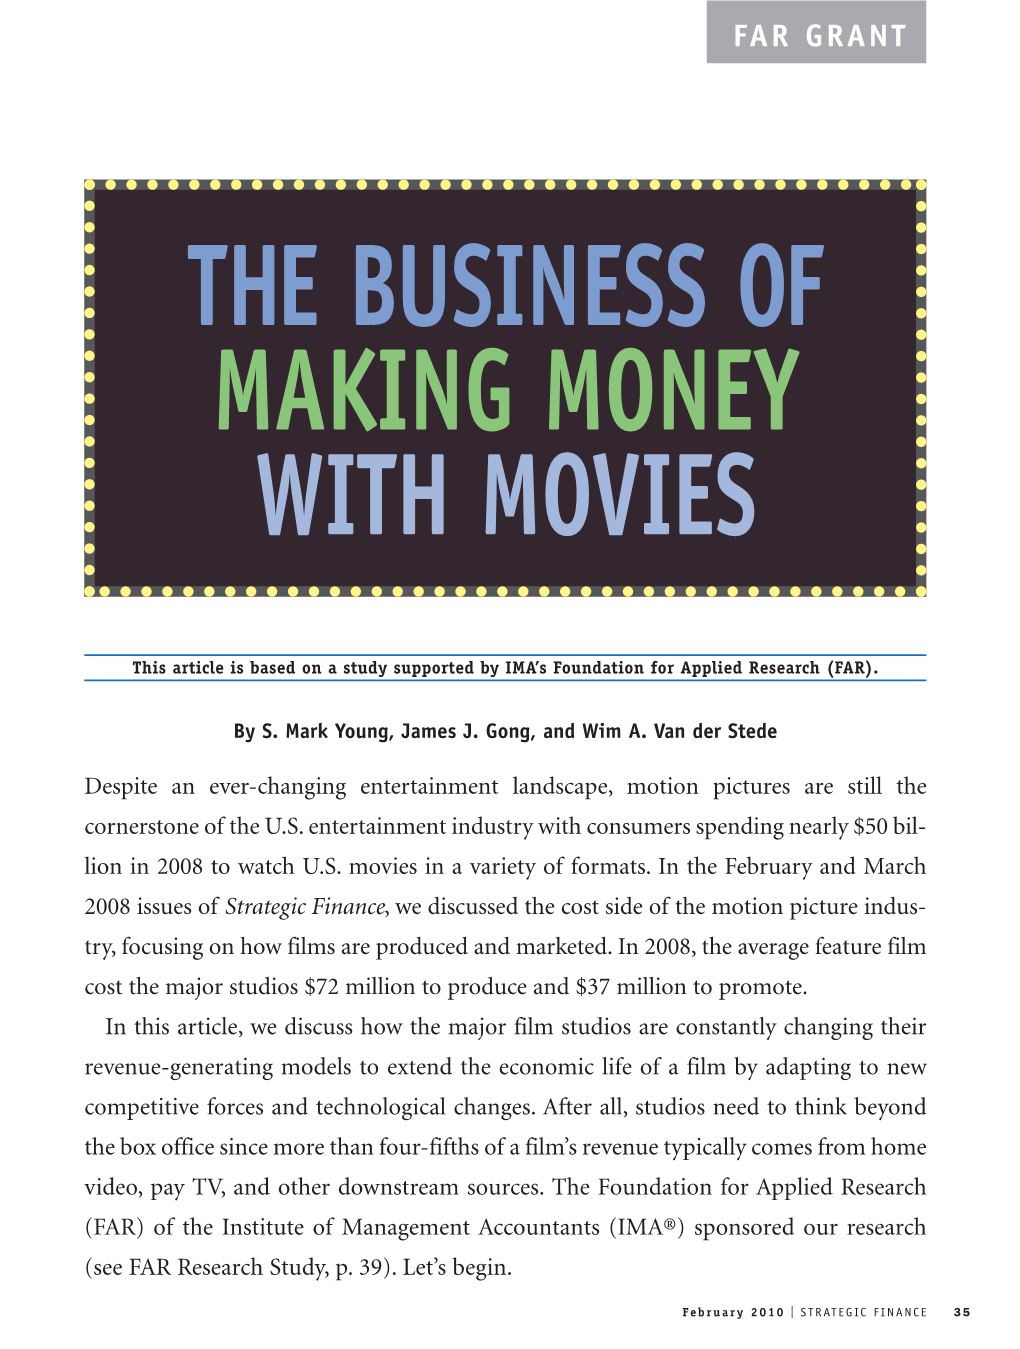 The Business of Making Money with Movies